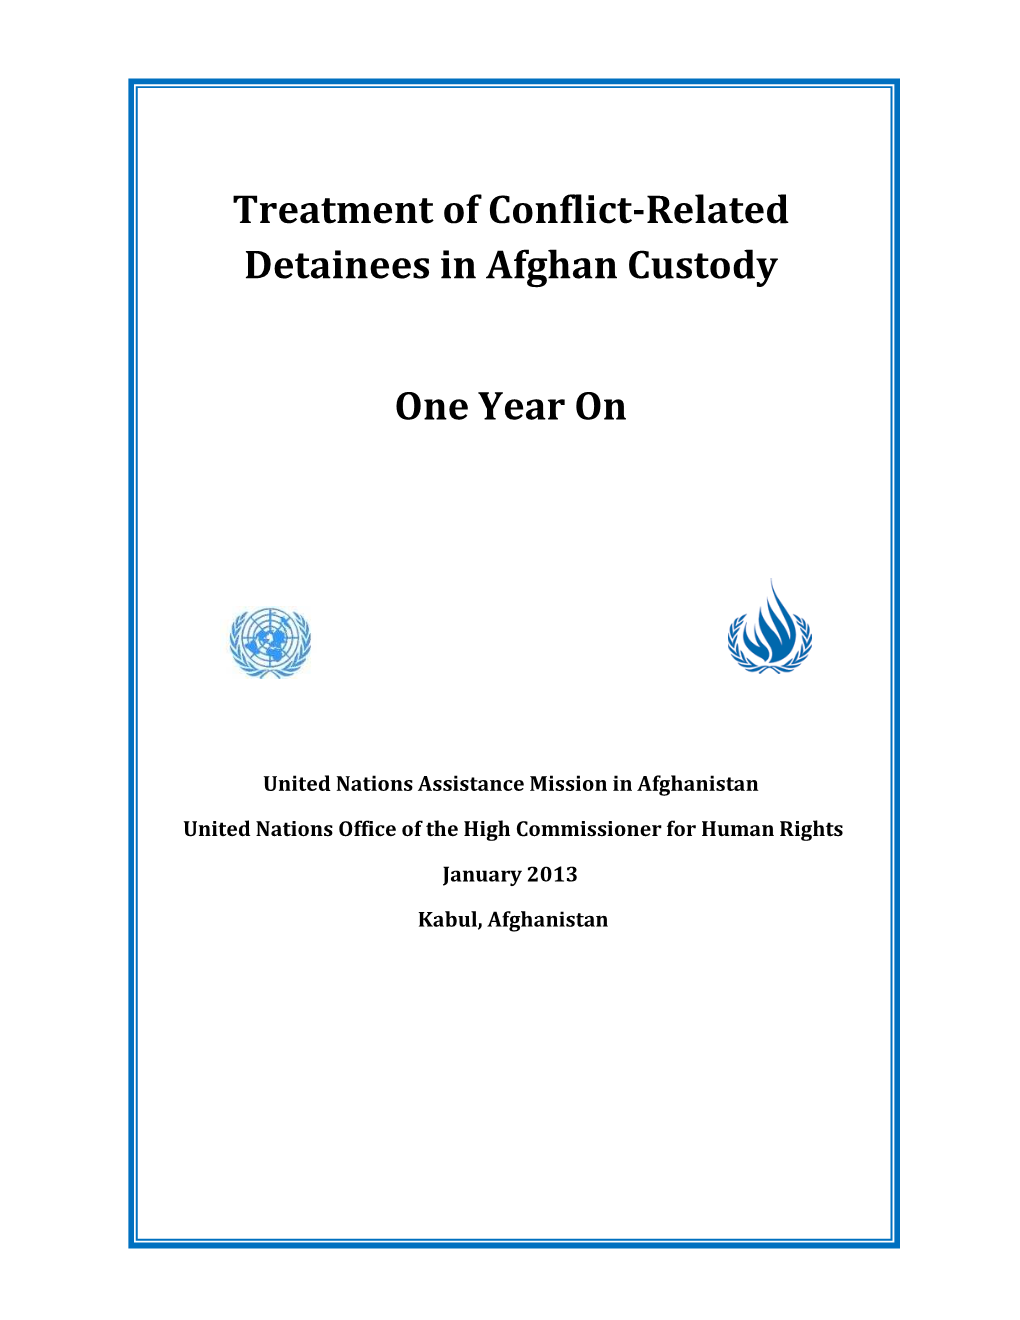 Treatment of Conflict-Related Detainees in Afghan Custody One Year On” and Changing the Determined Deadline for Presentation of the Response on the Said Report